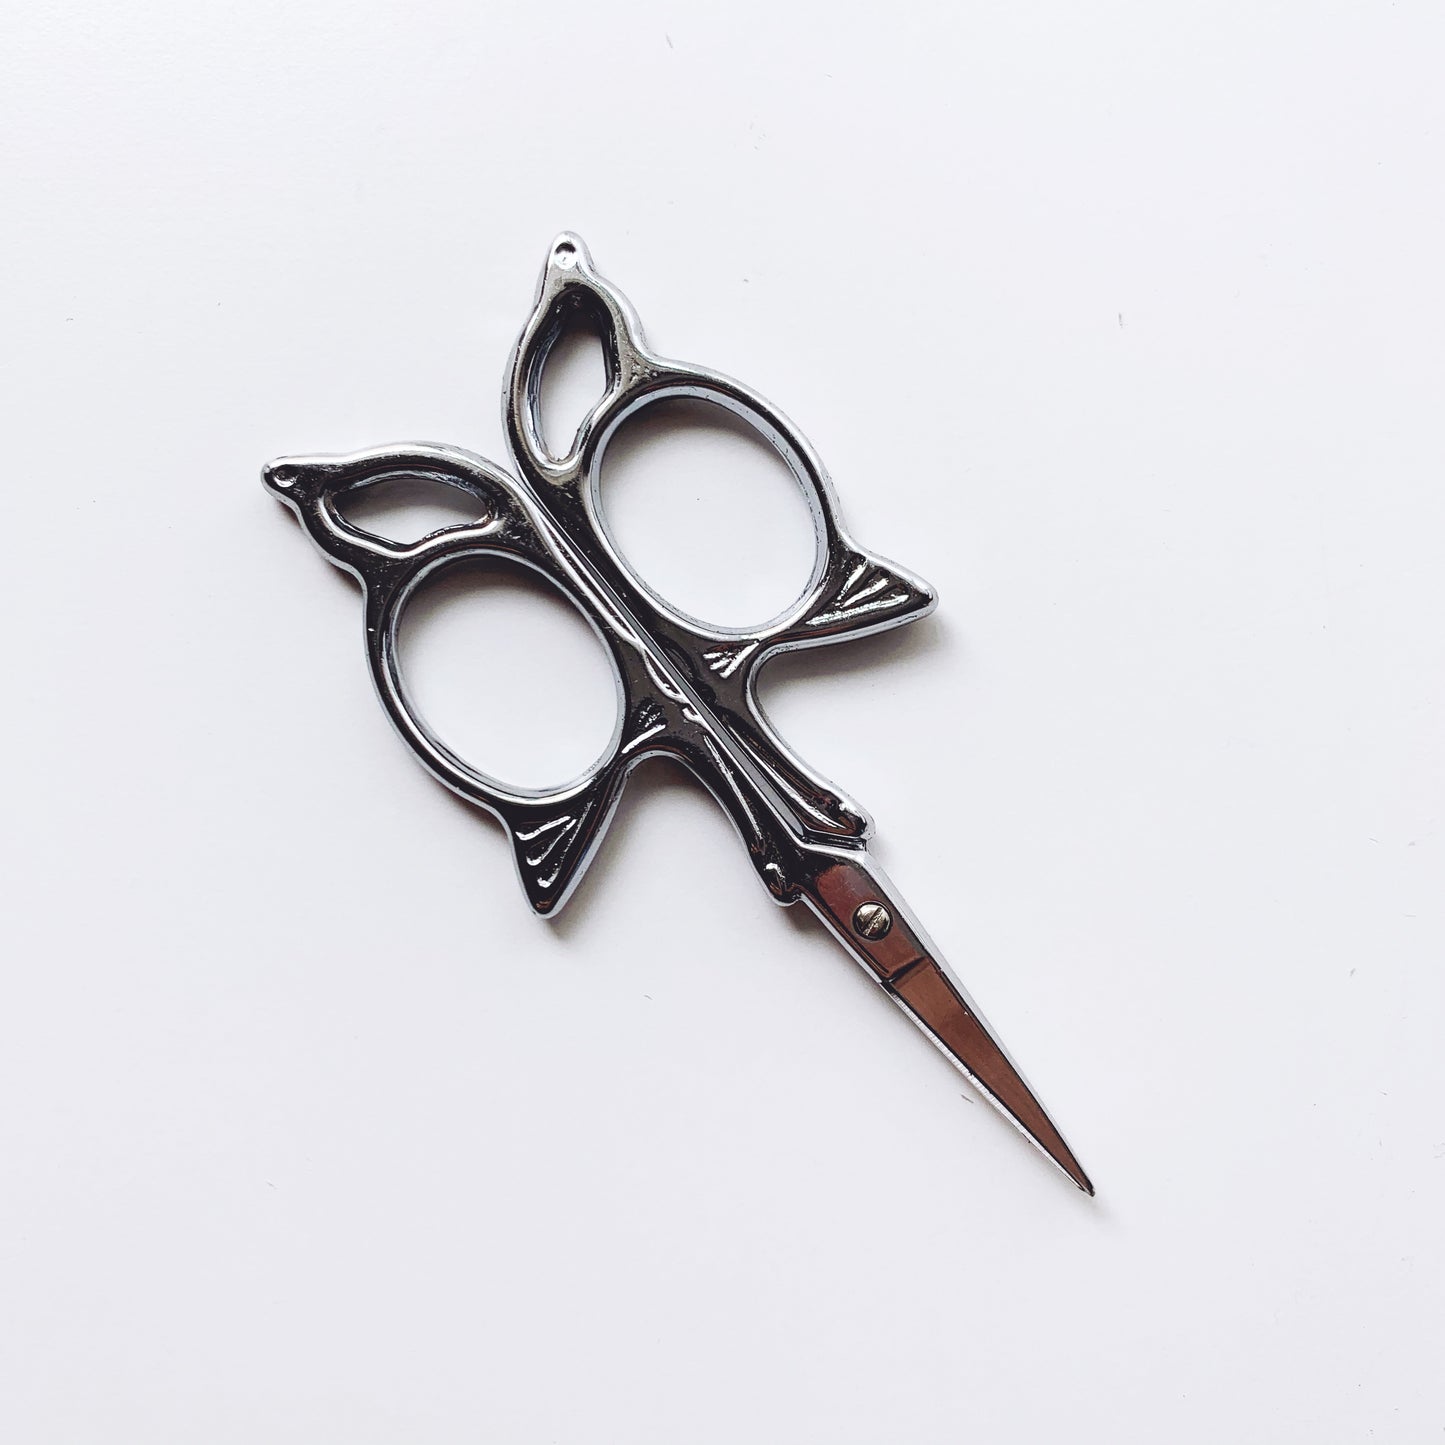 Butterfly Antique Style Silver Stainless Steel Embroidery Scissors